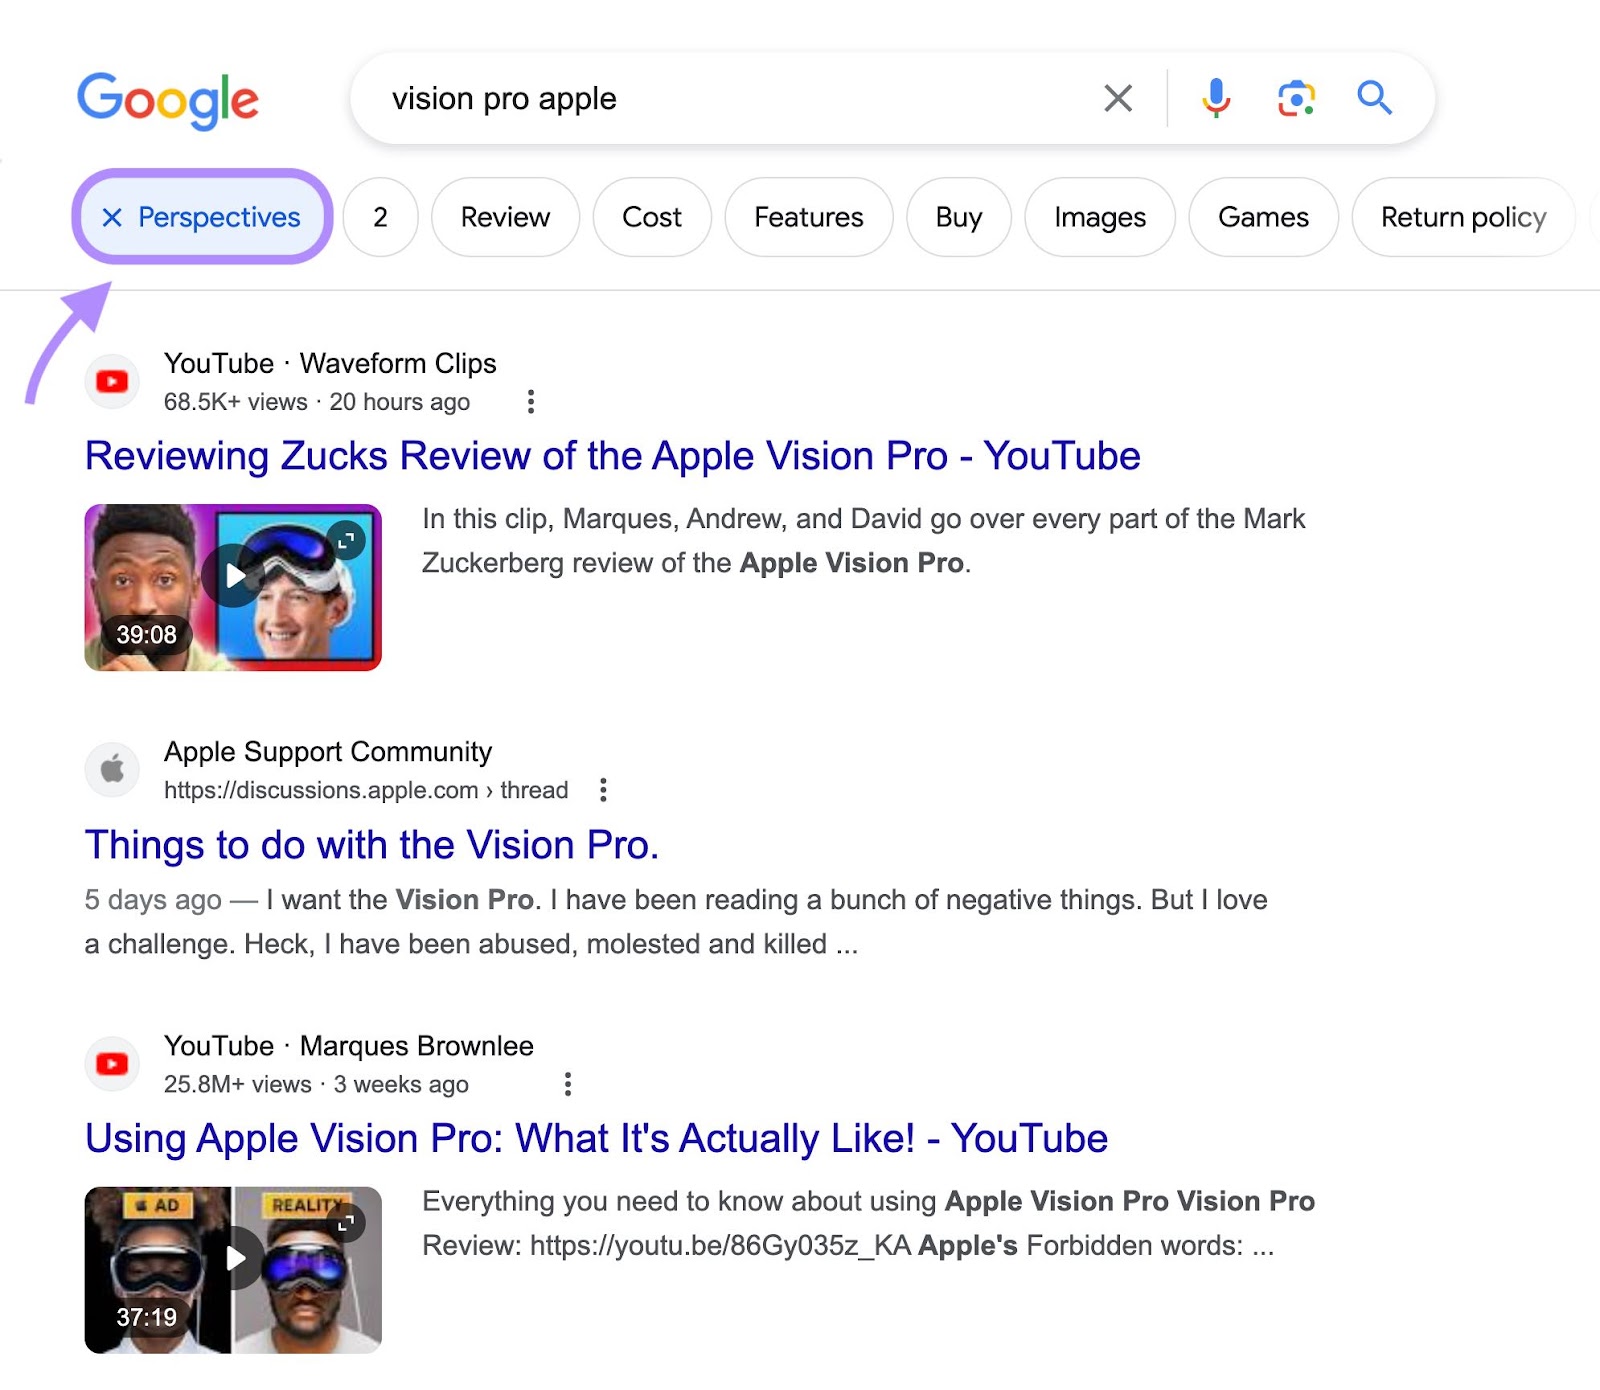 “Perspectives” filter connected  Google SERP